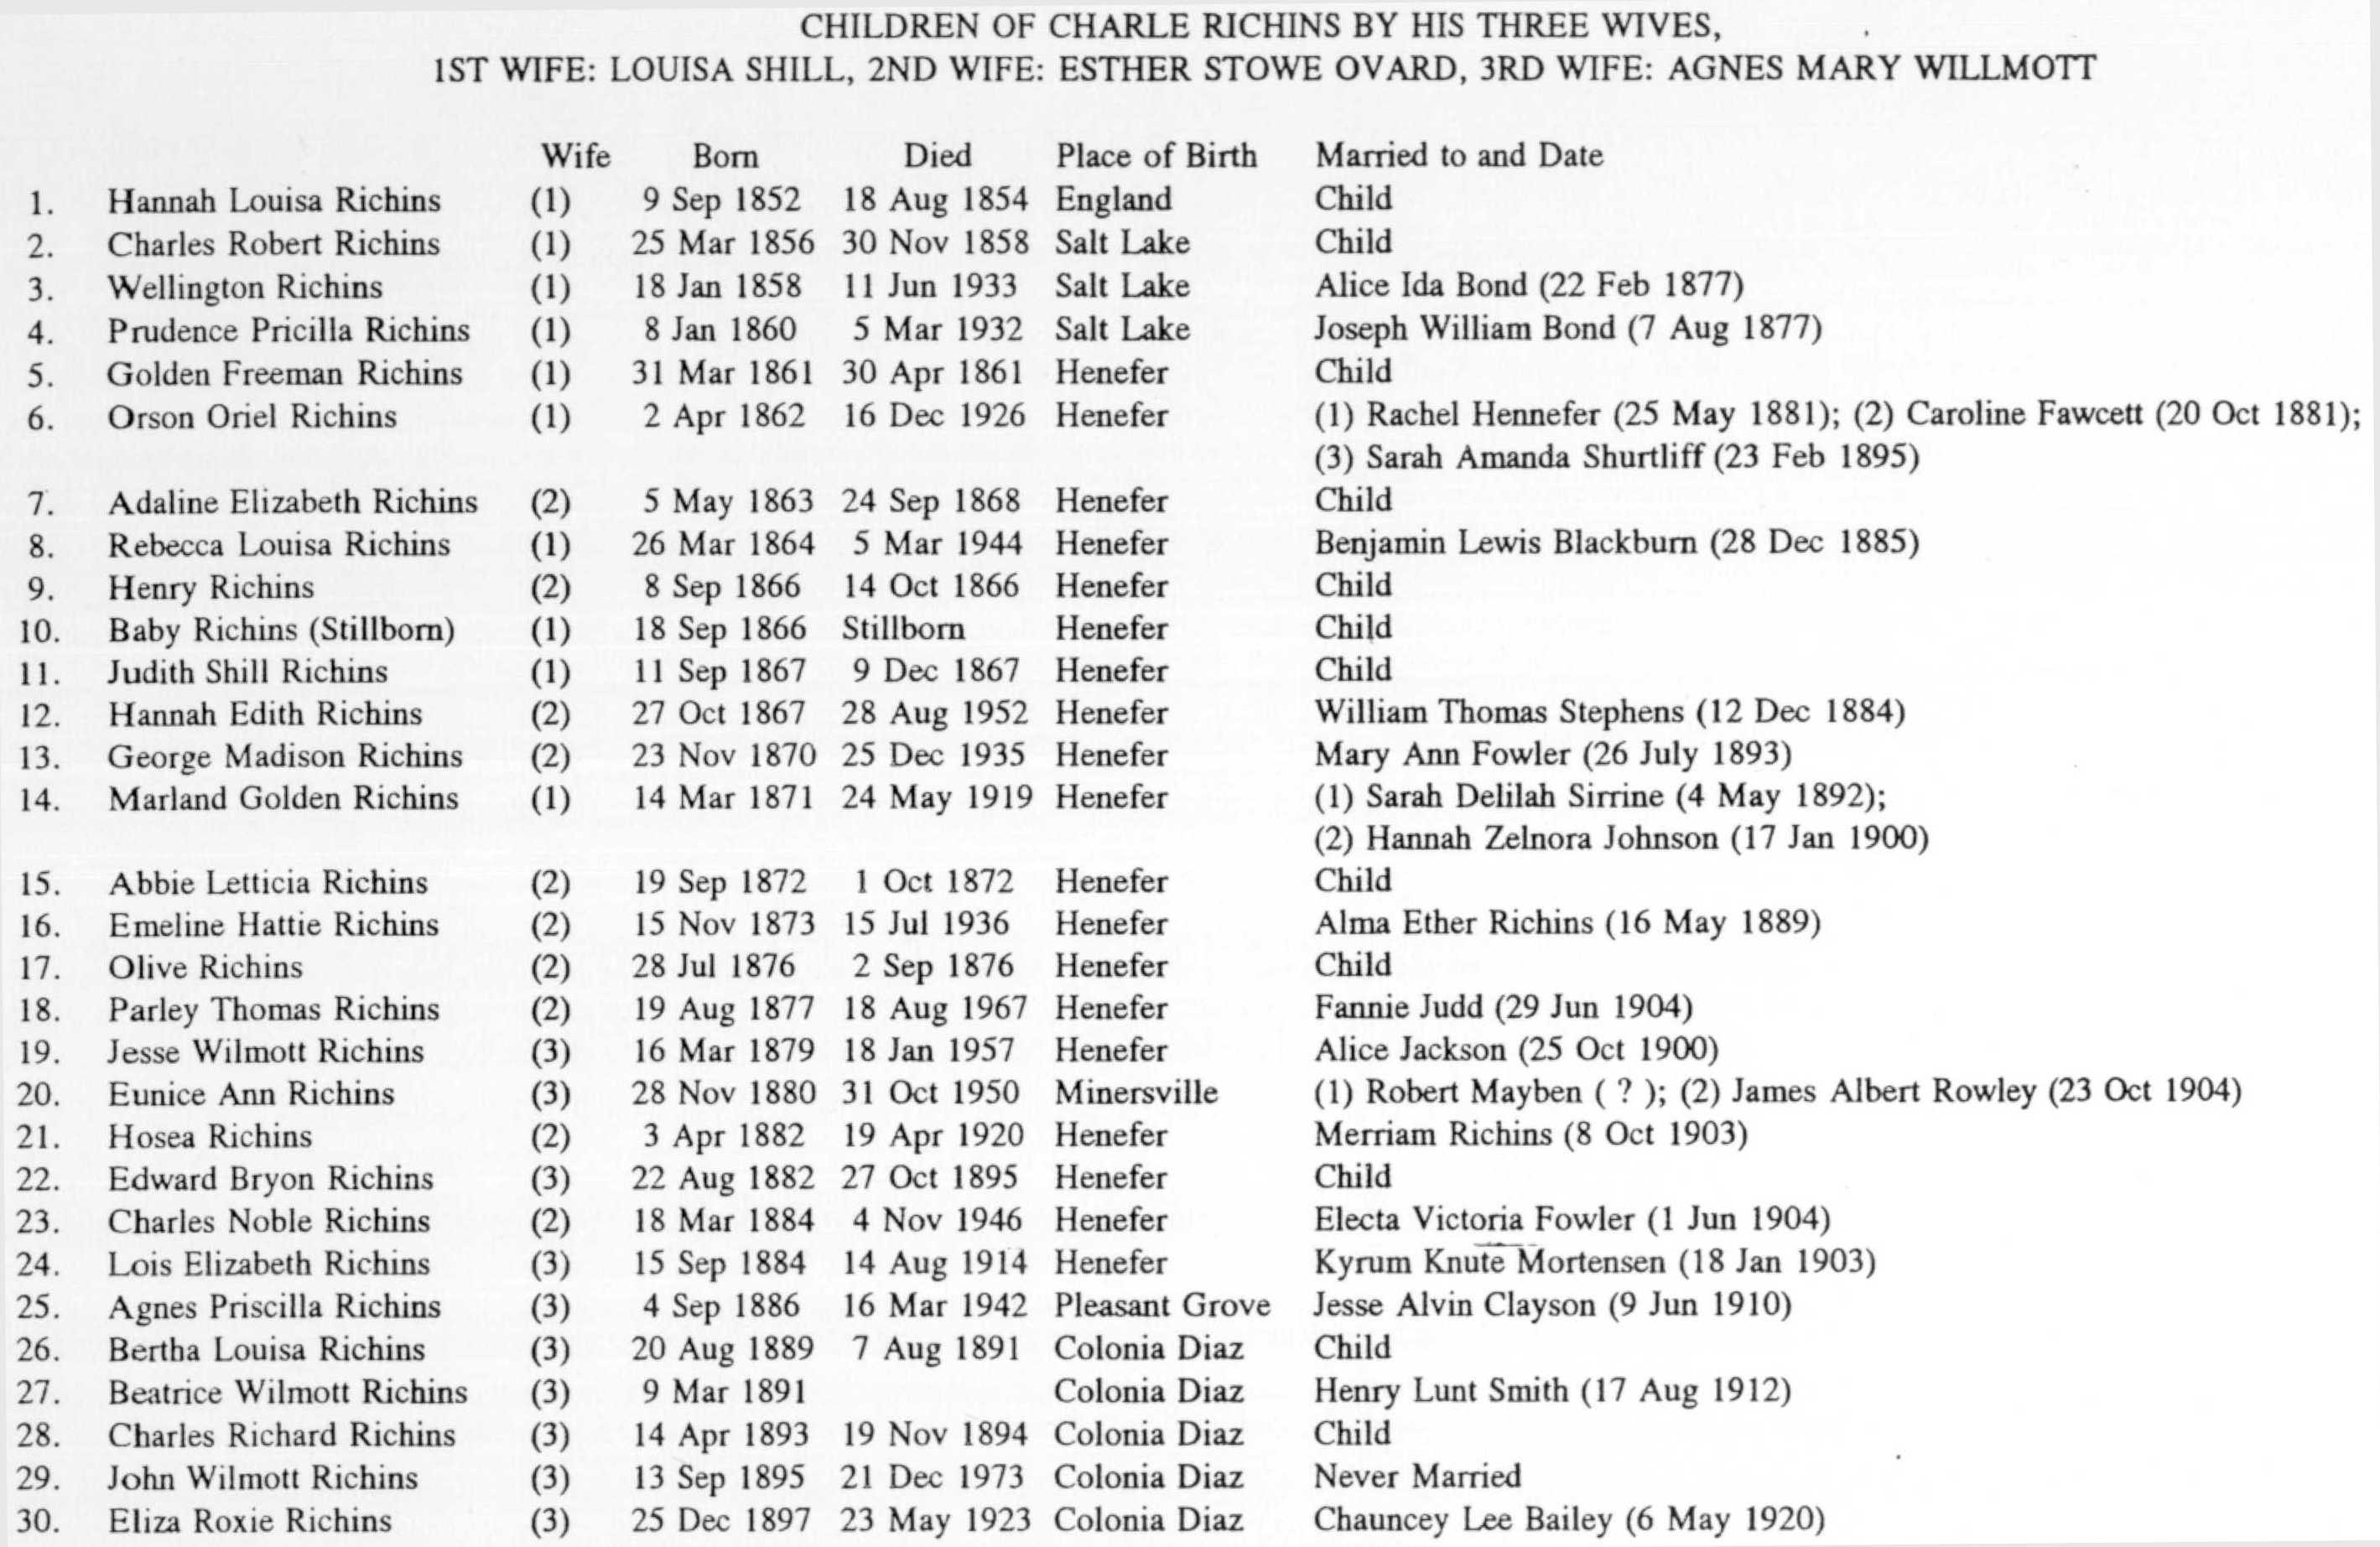 Birth Order Chart of Children of Charles W. Richins and his 3 wives